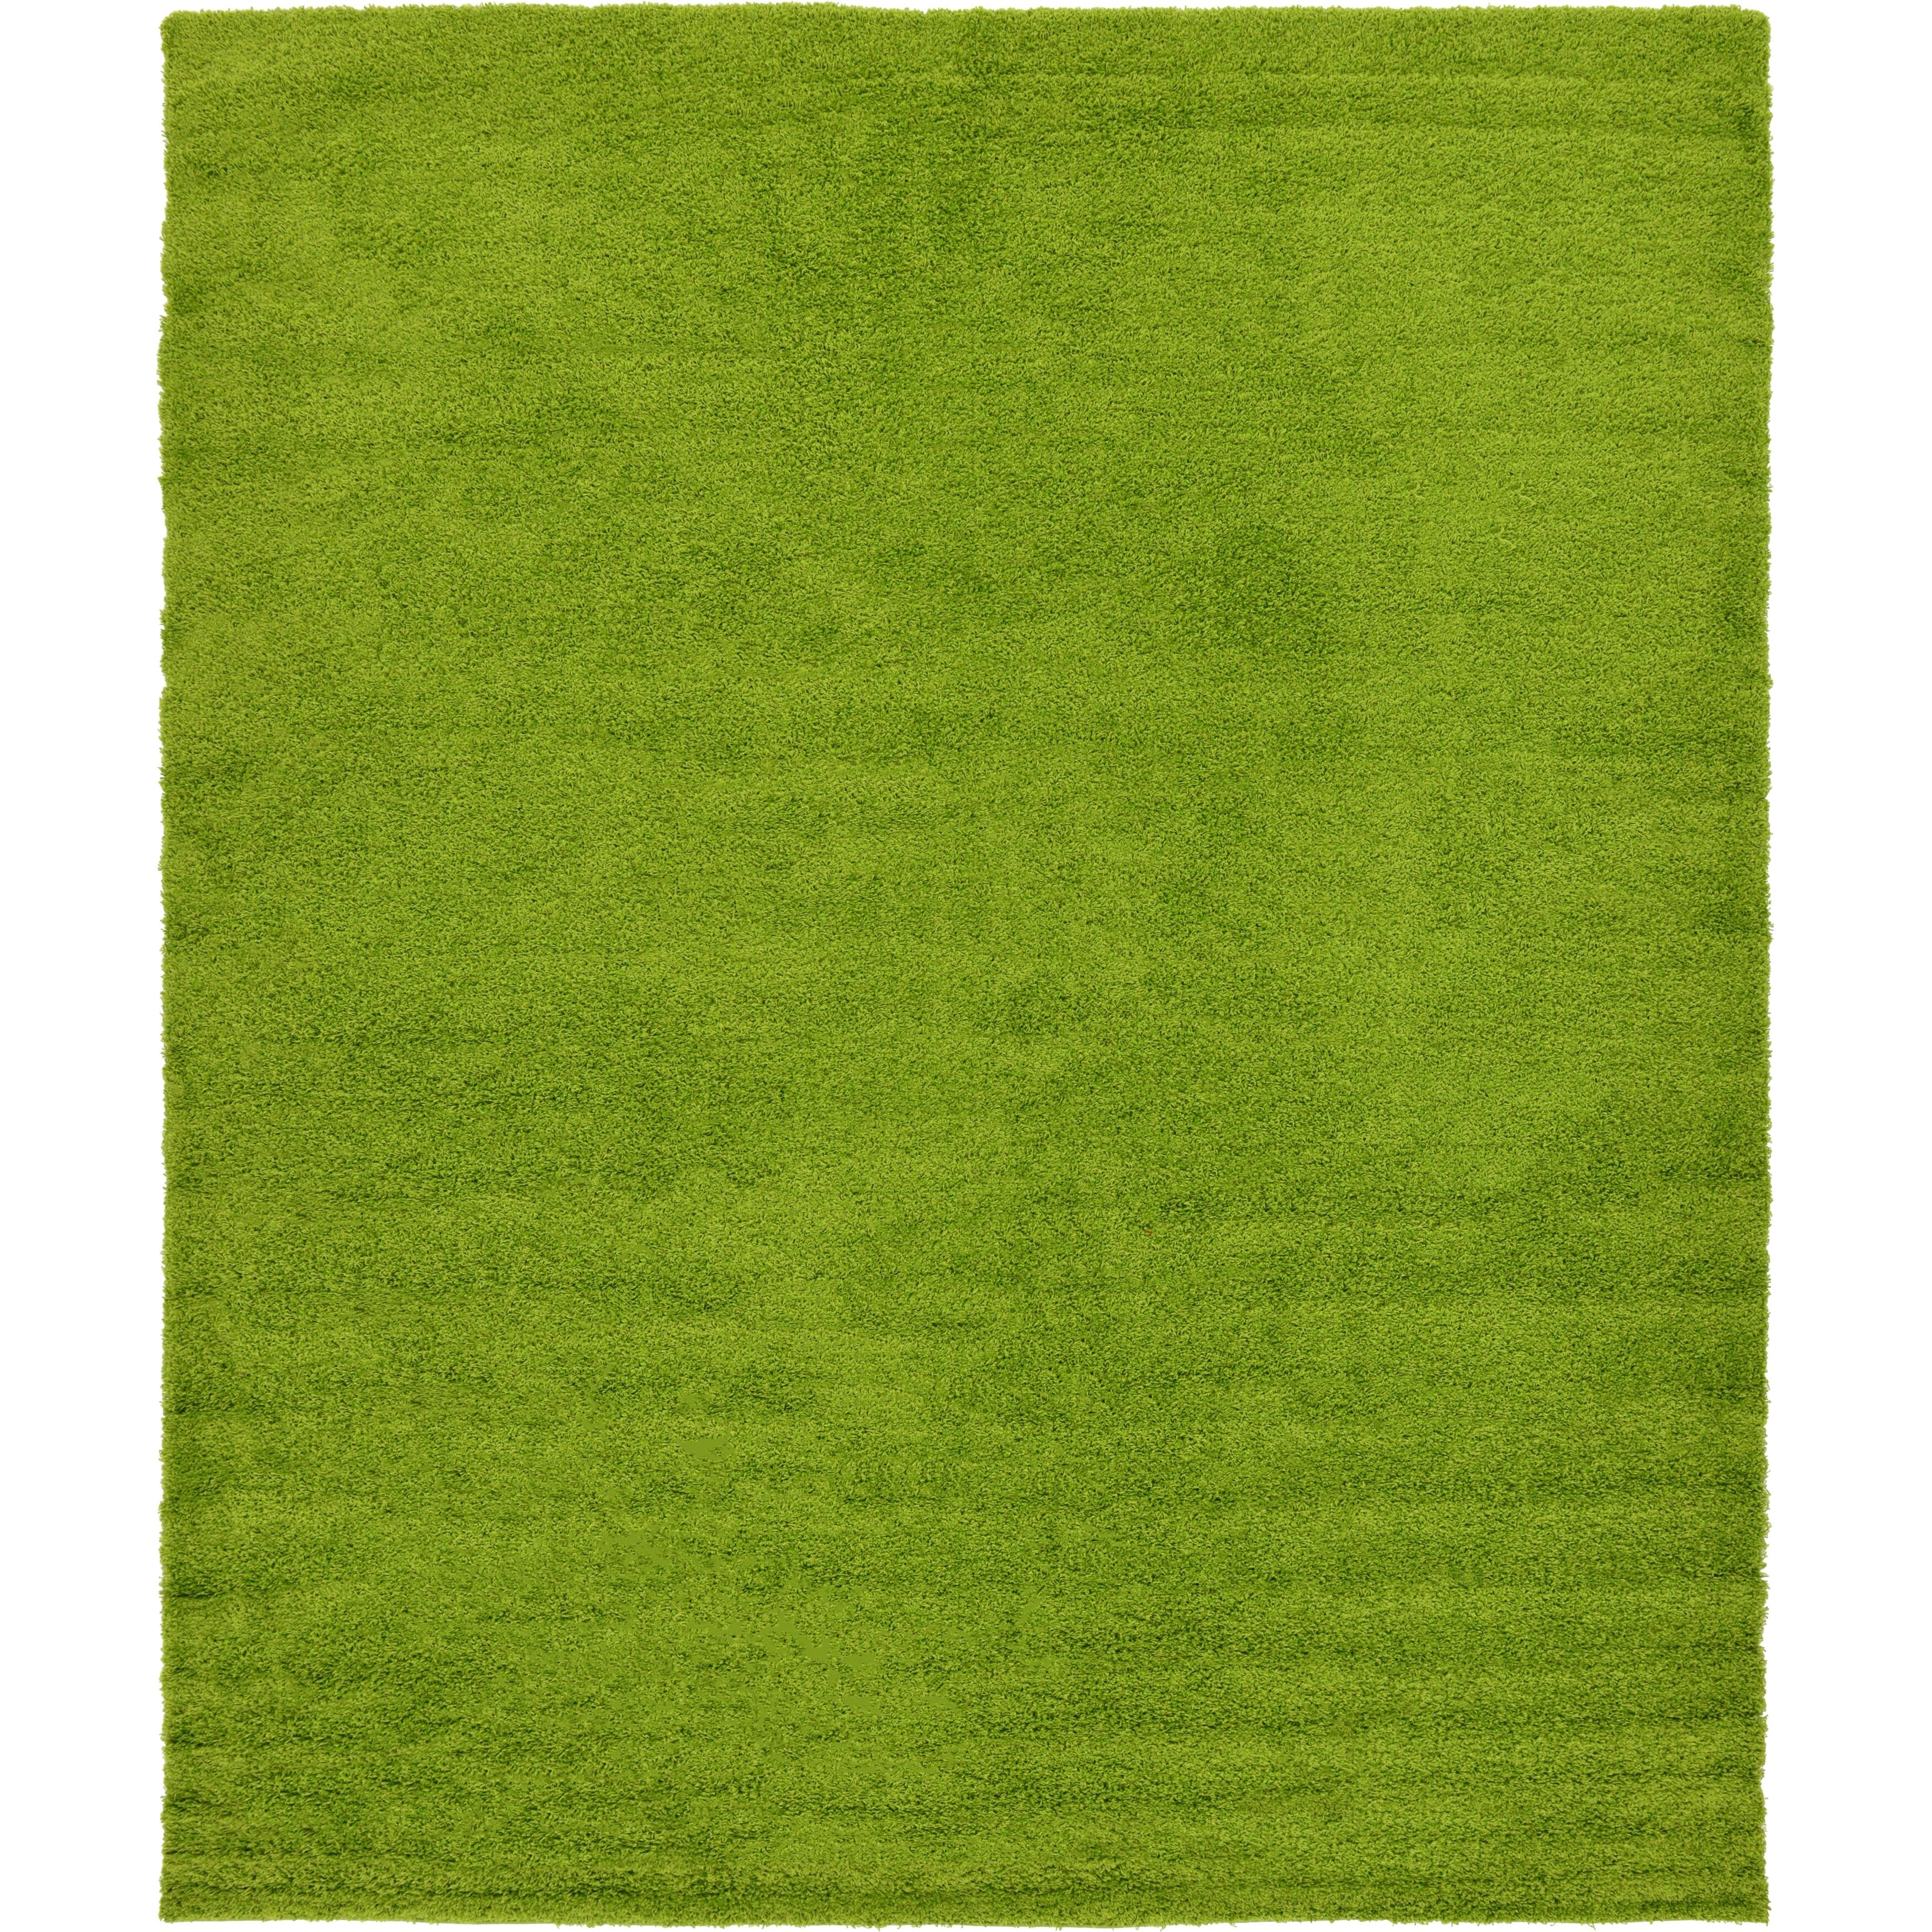 Buy Green Shag Area Rugs Online At Overstockcom Our Best Rugs Deals